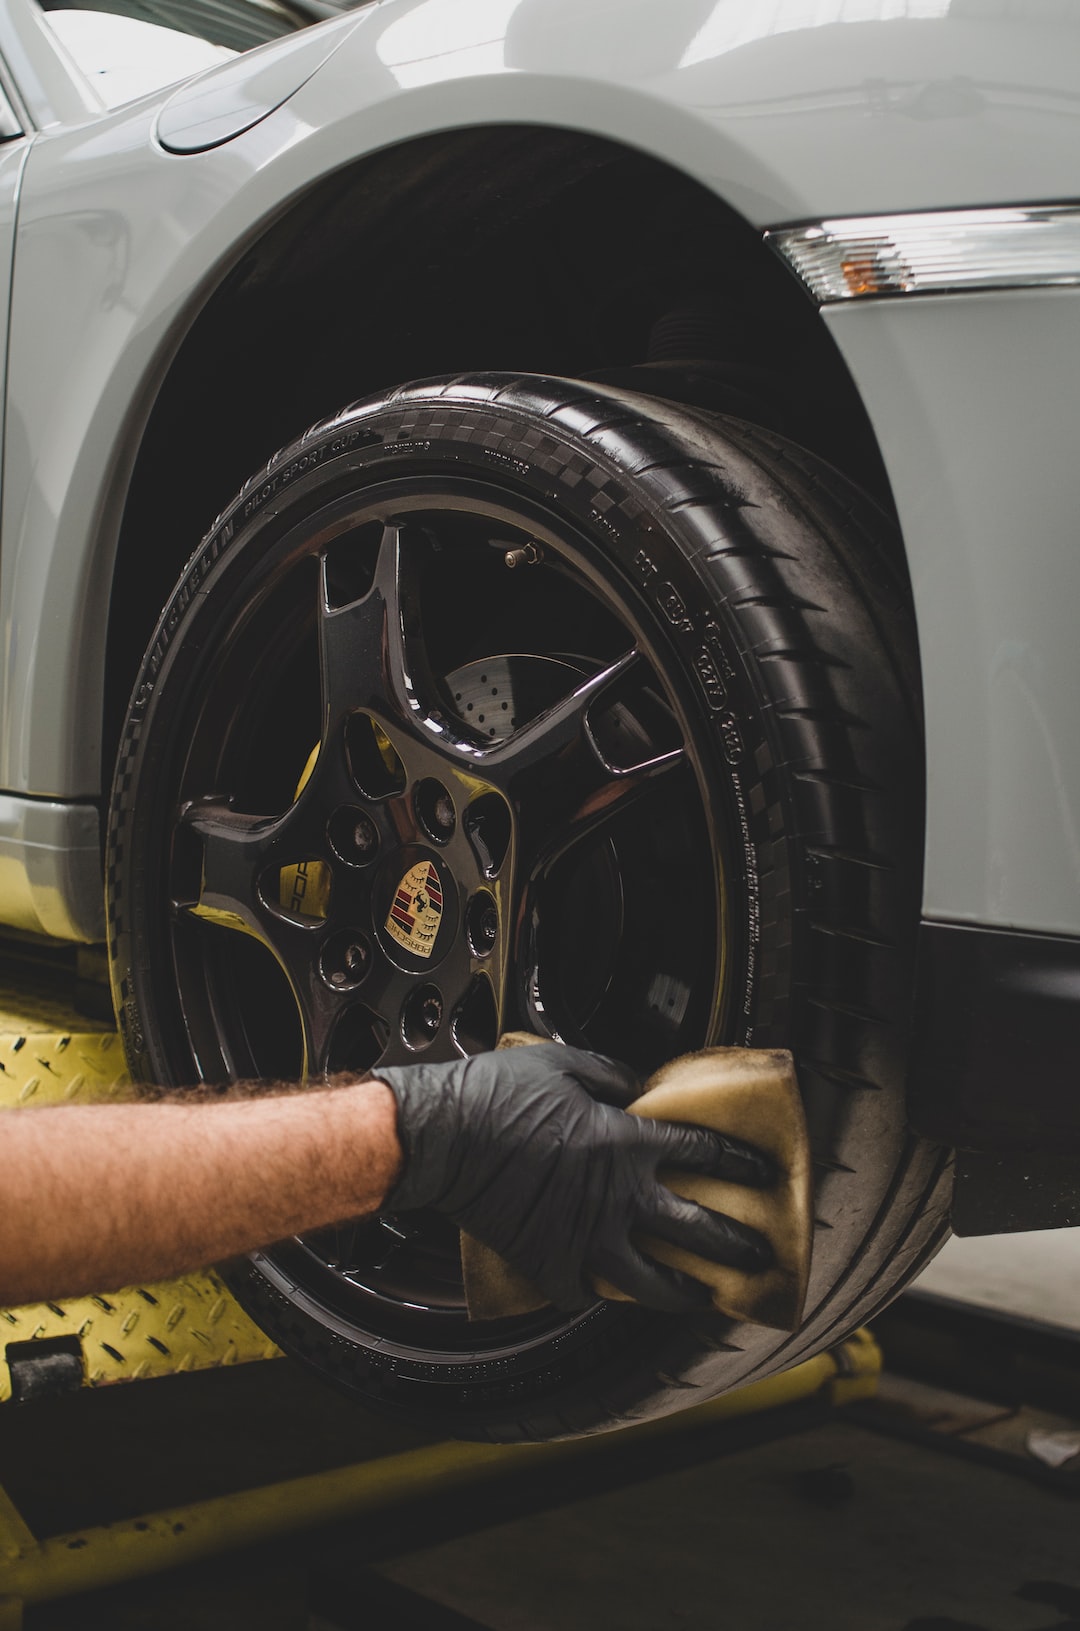 An image showcasing a gleaming car exterior after a professional detailing, with meticulously polished surfaces and flawlessly cleaned rims, emphasizing how car detailing saves you time and effort